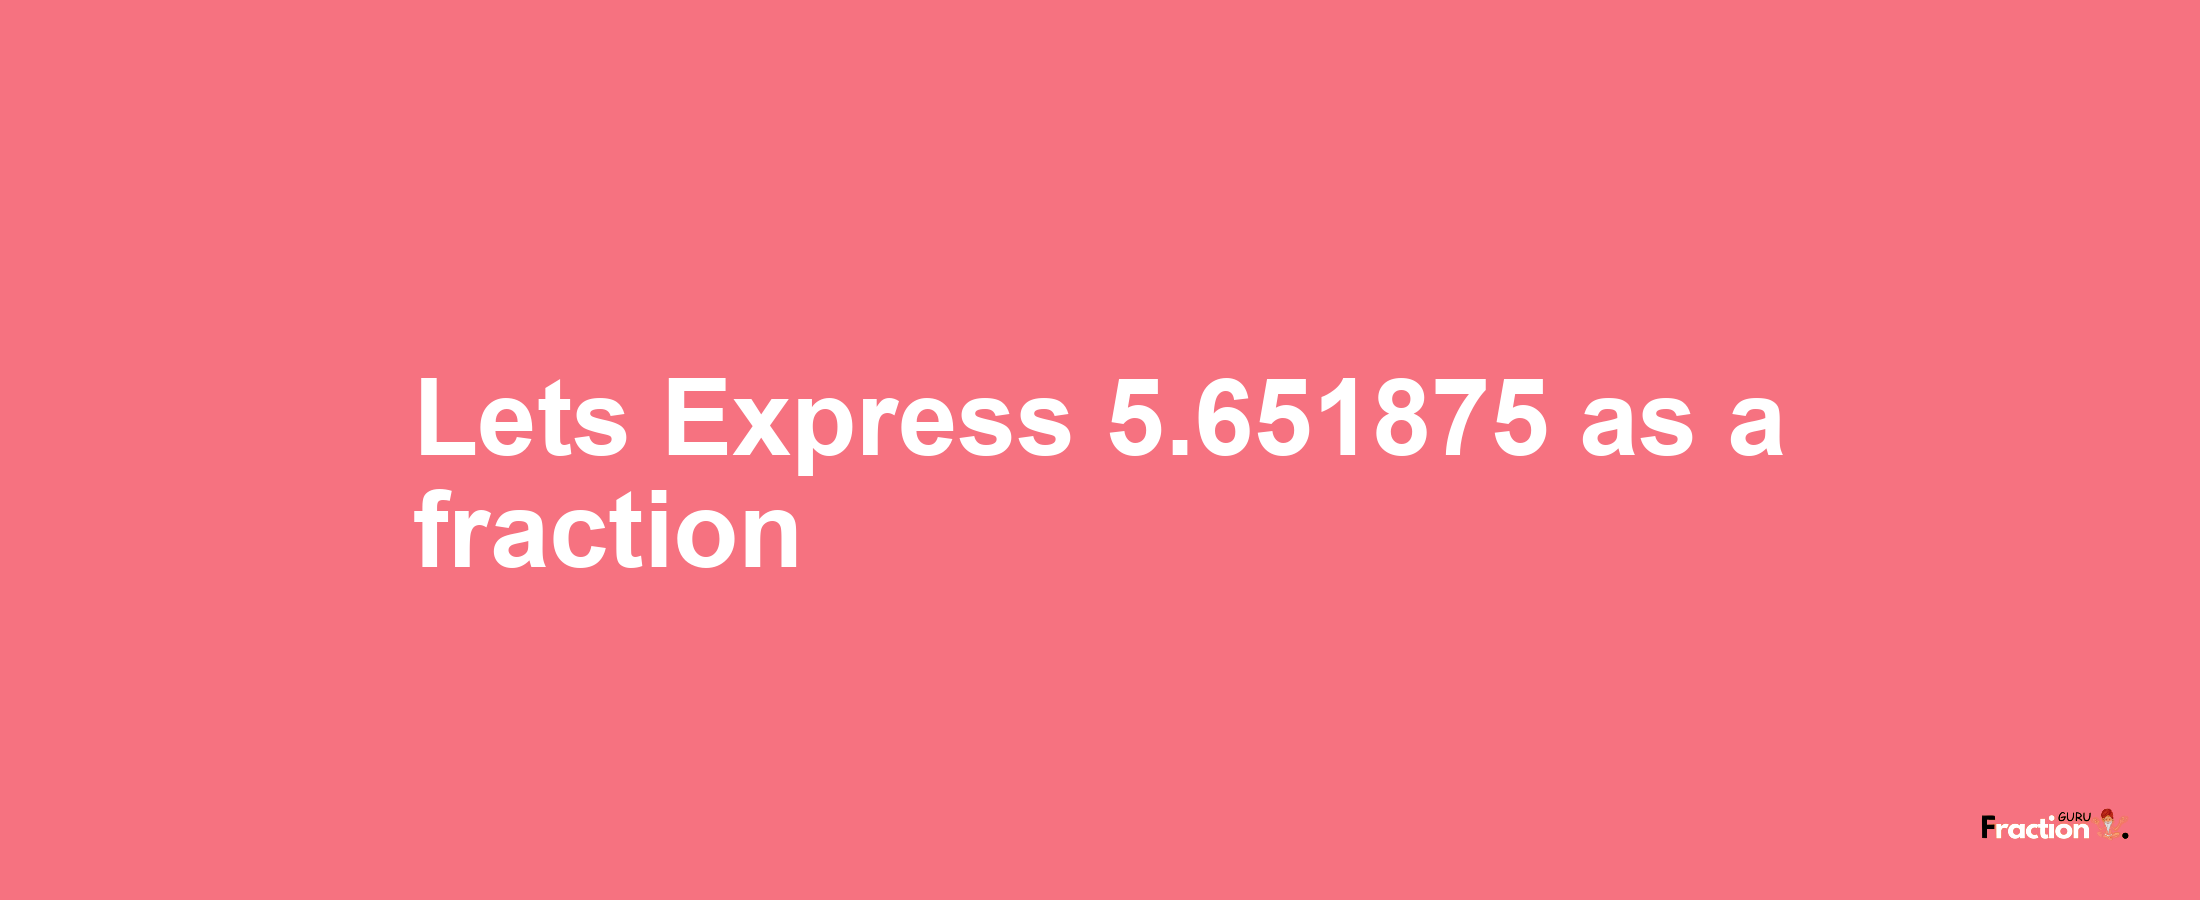 Lets Express 5.651875 as afraction